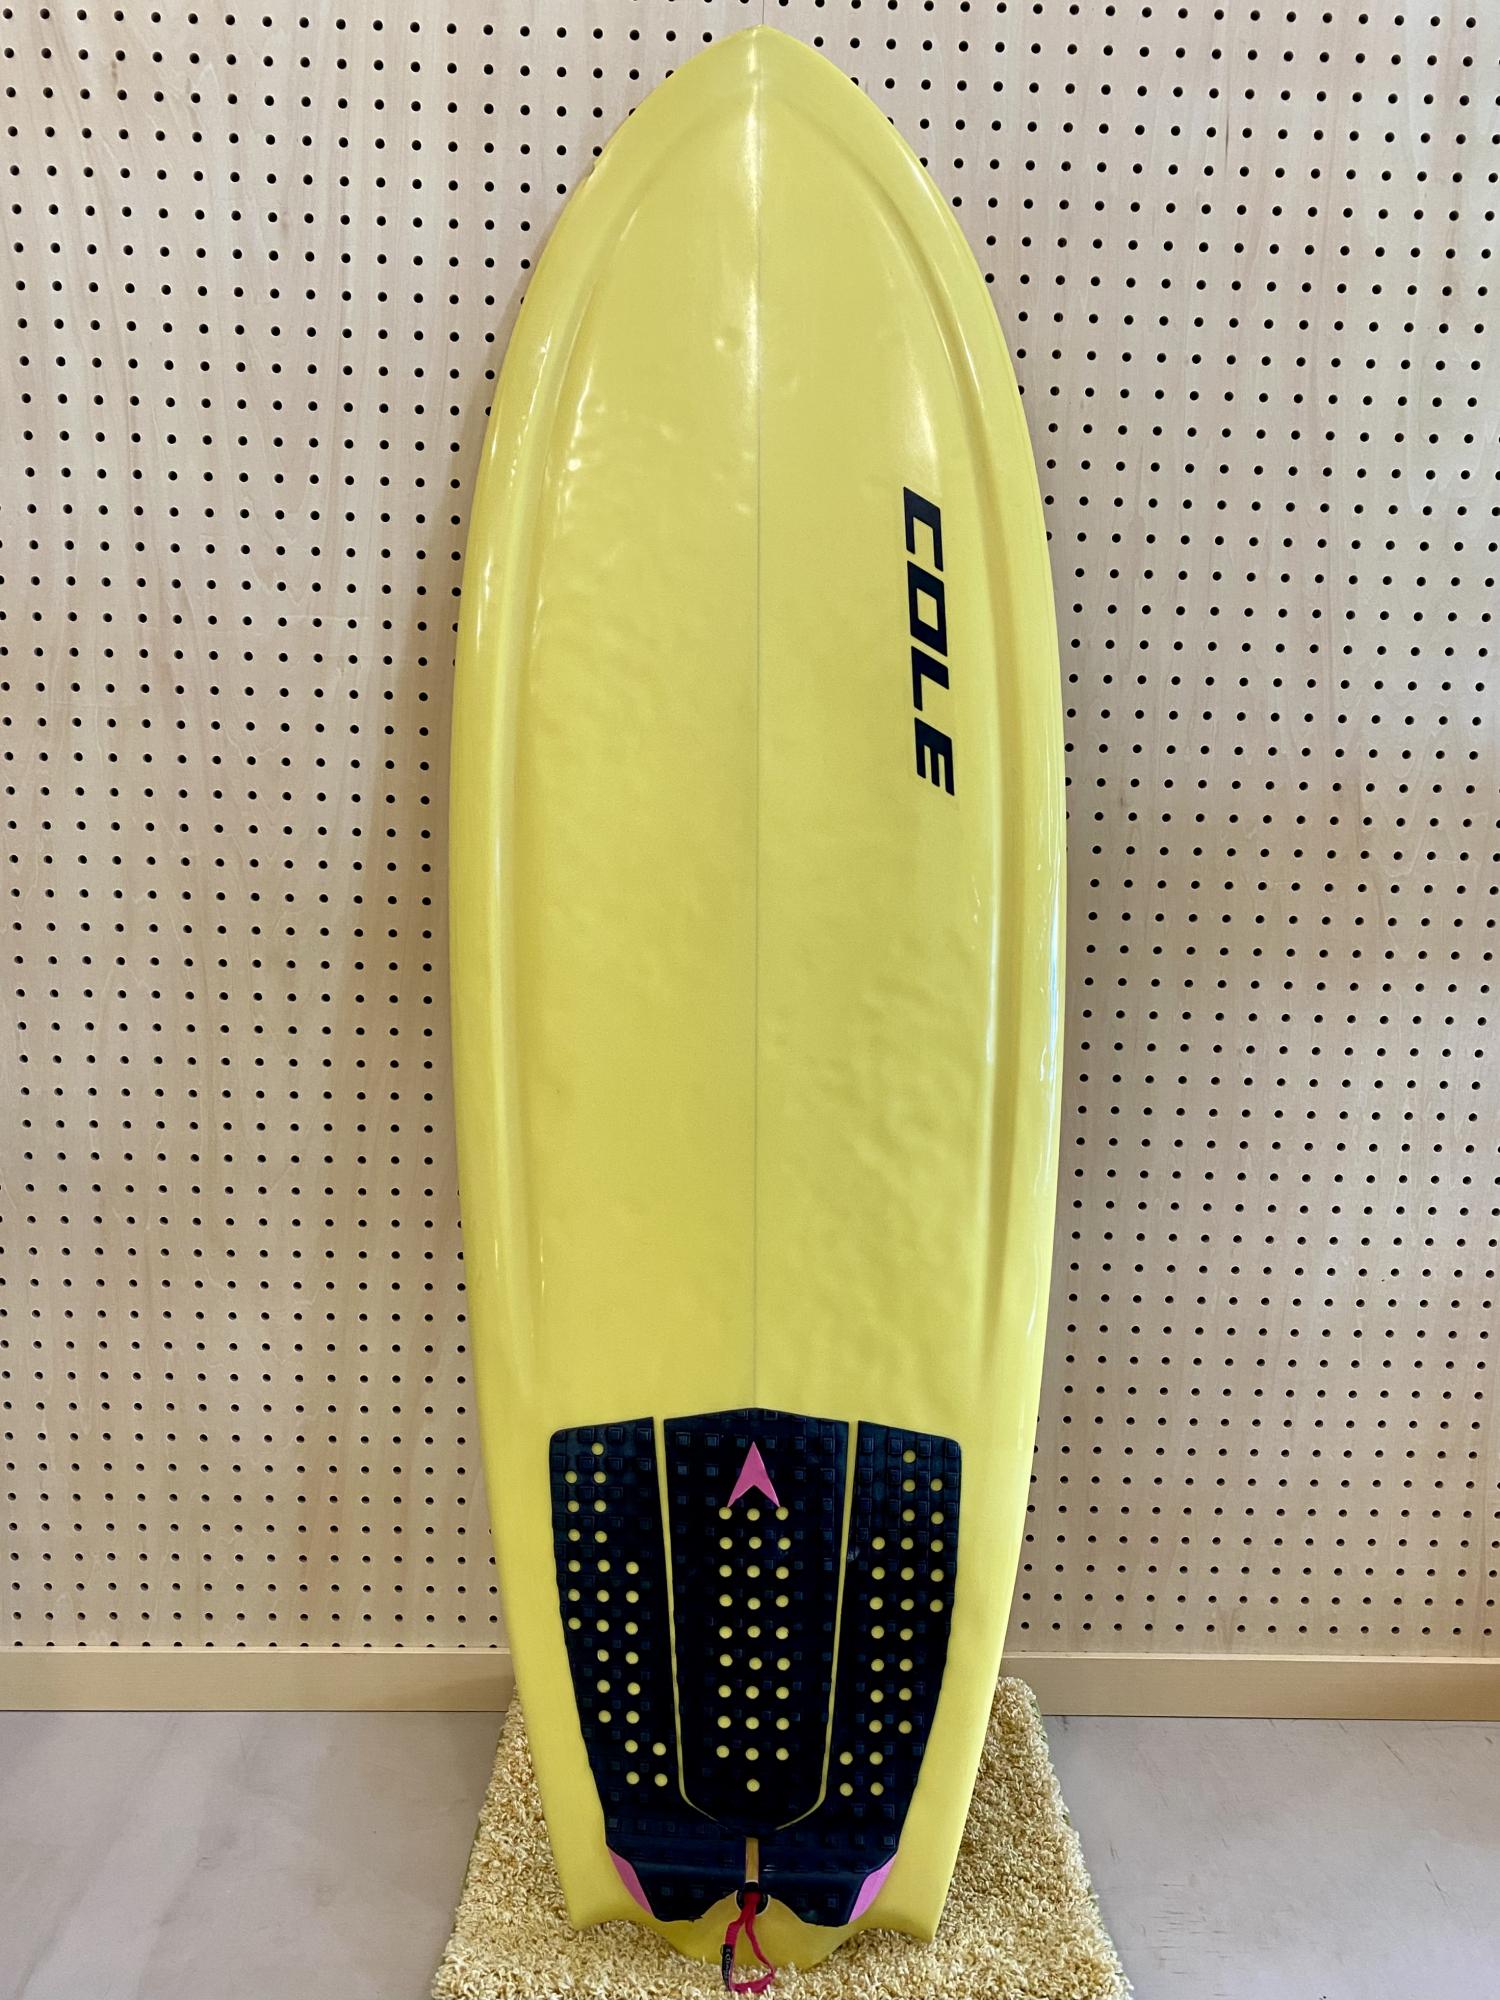 USED BOARDS (Loose Cannon 5.8 COLE SURFBOARDS)